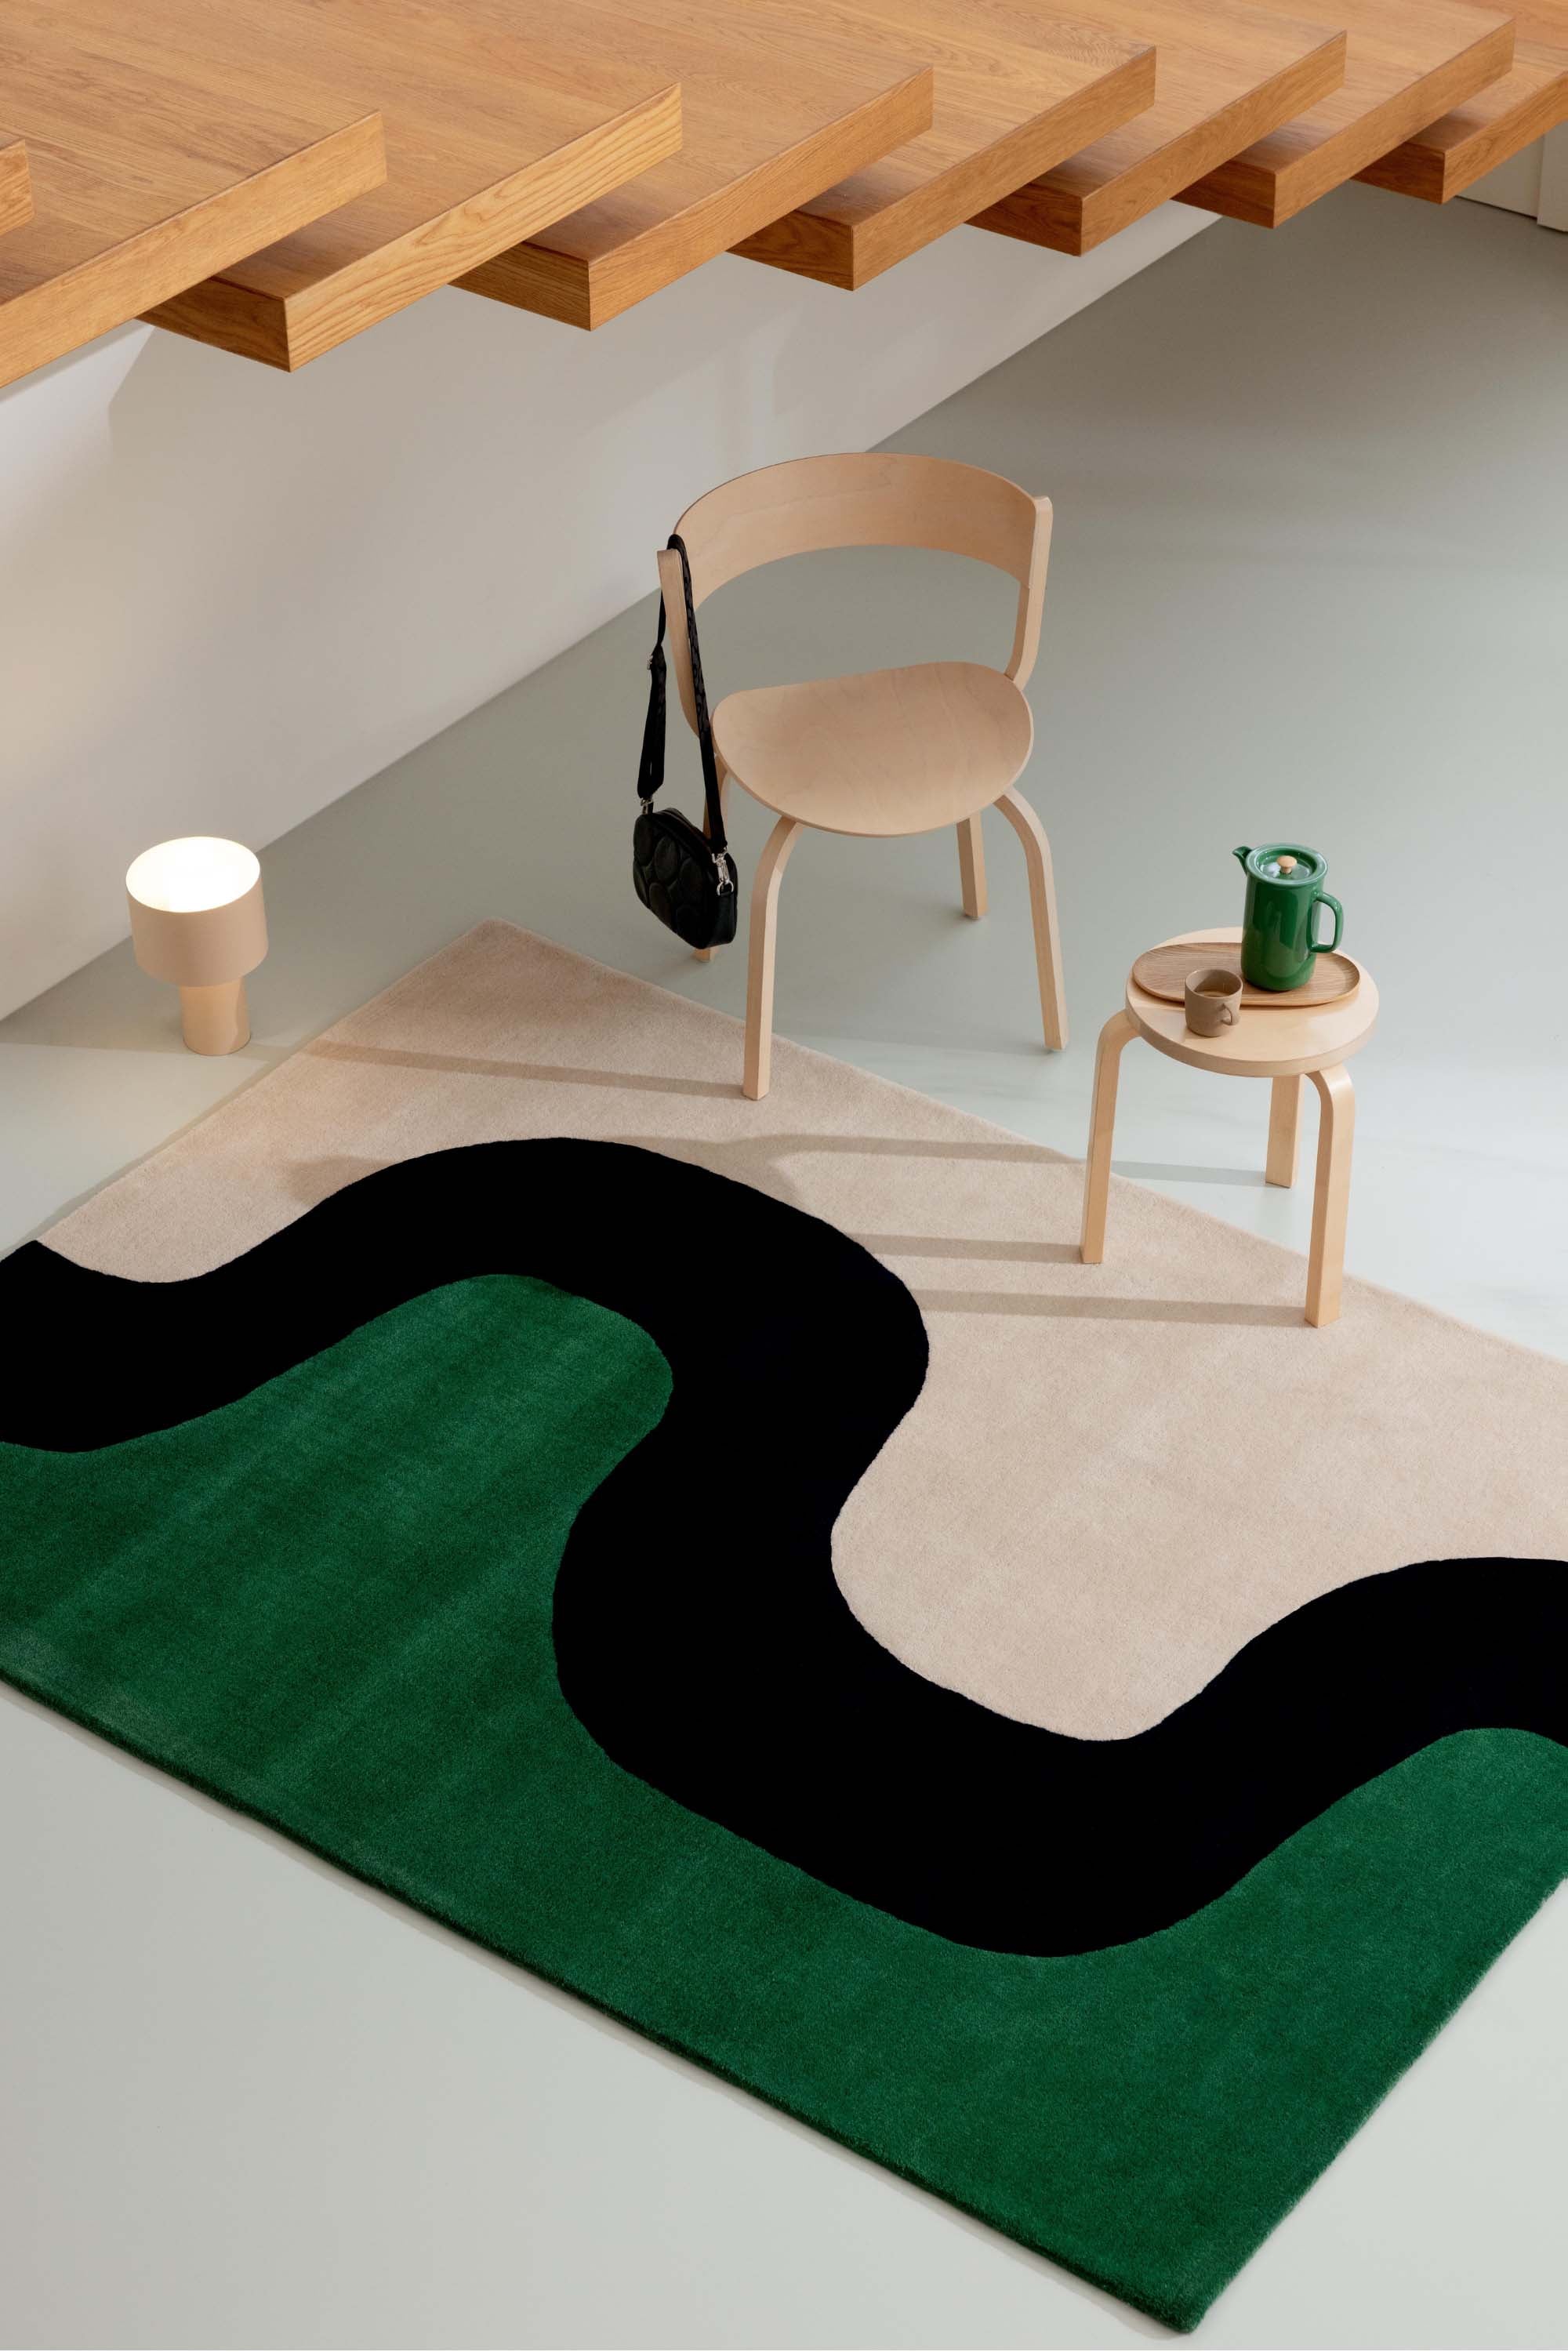 Beige and green rug with cream blue pattern